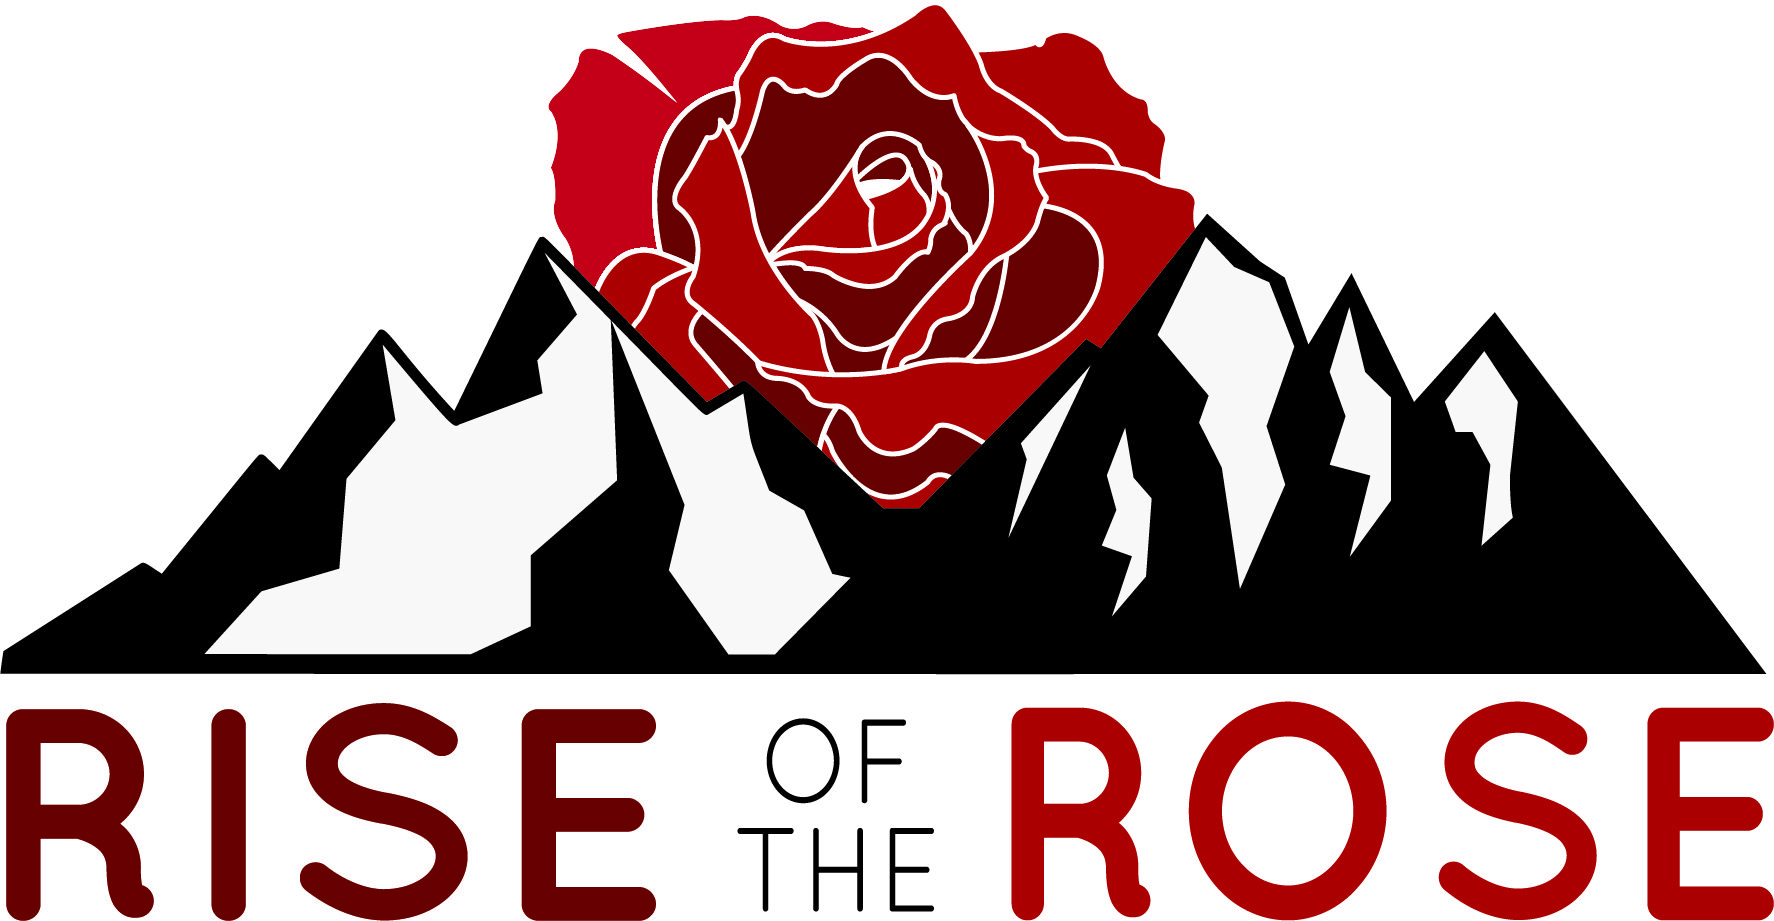 A red and black graphic depicting mountains with a rose superimposed above, accompanied by the text "Rise of the Shoshone Rose Casino and Hotel.